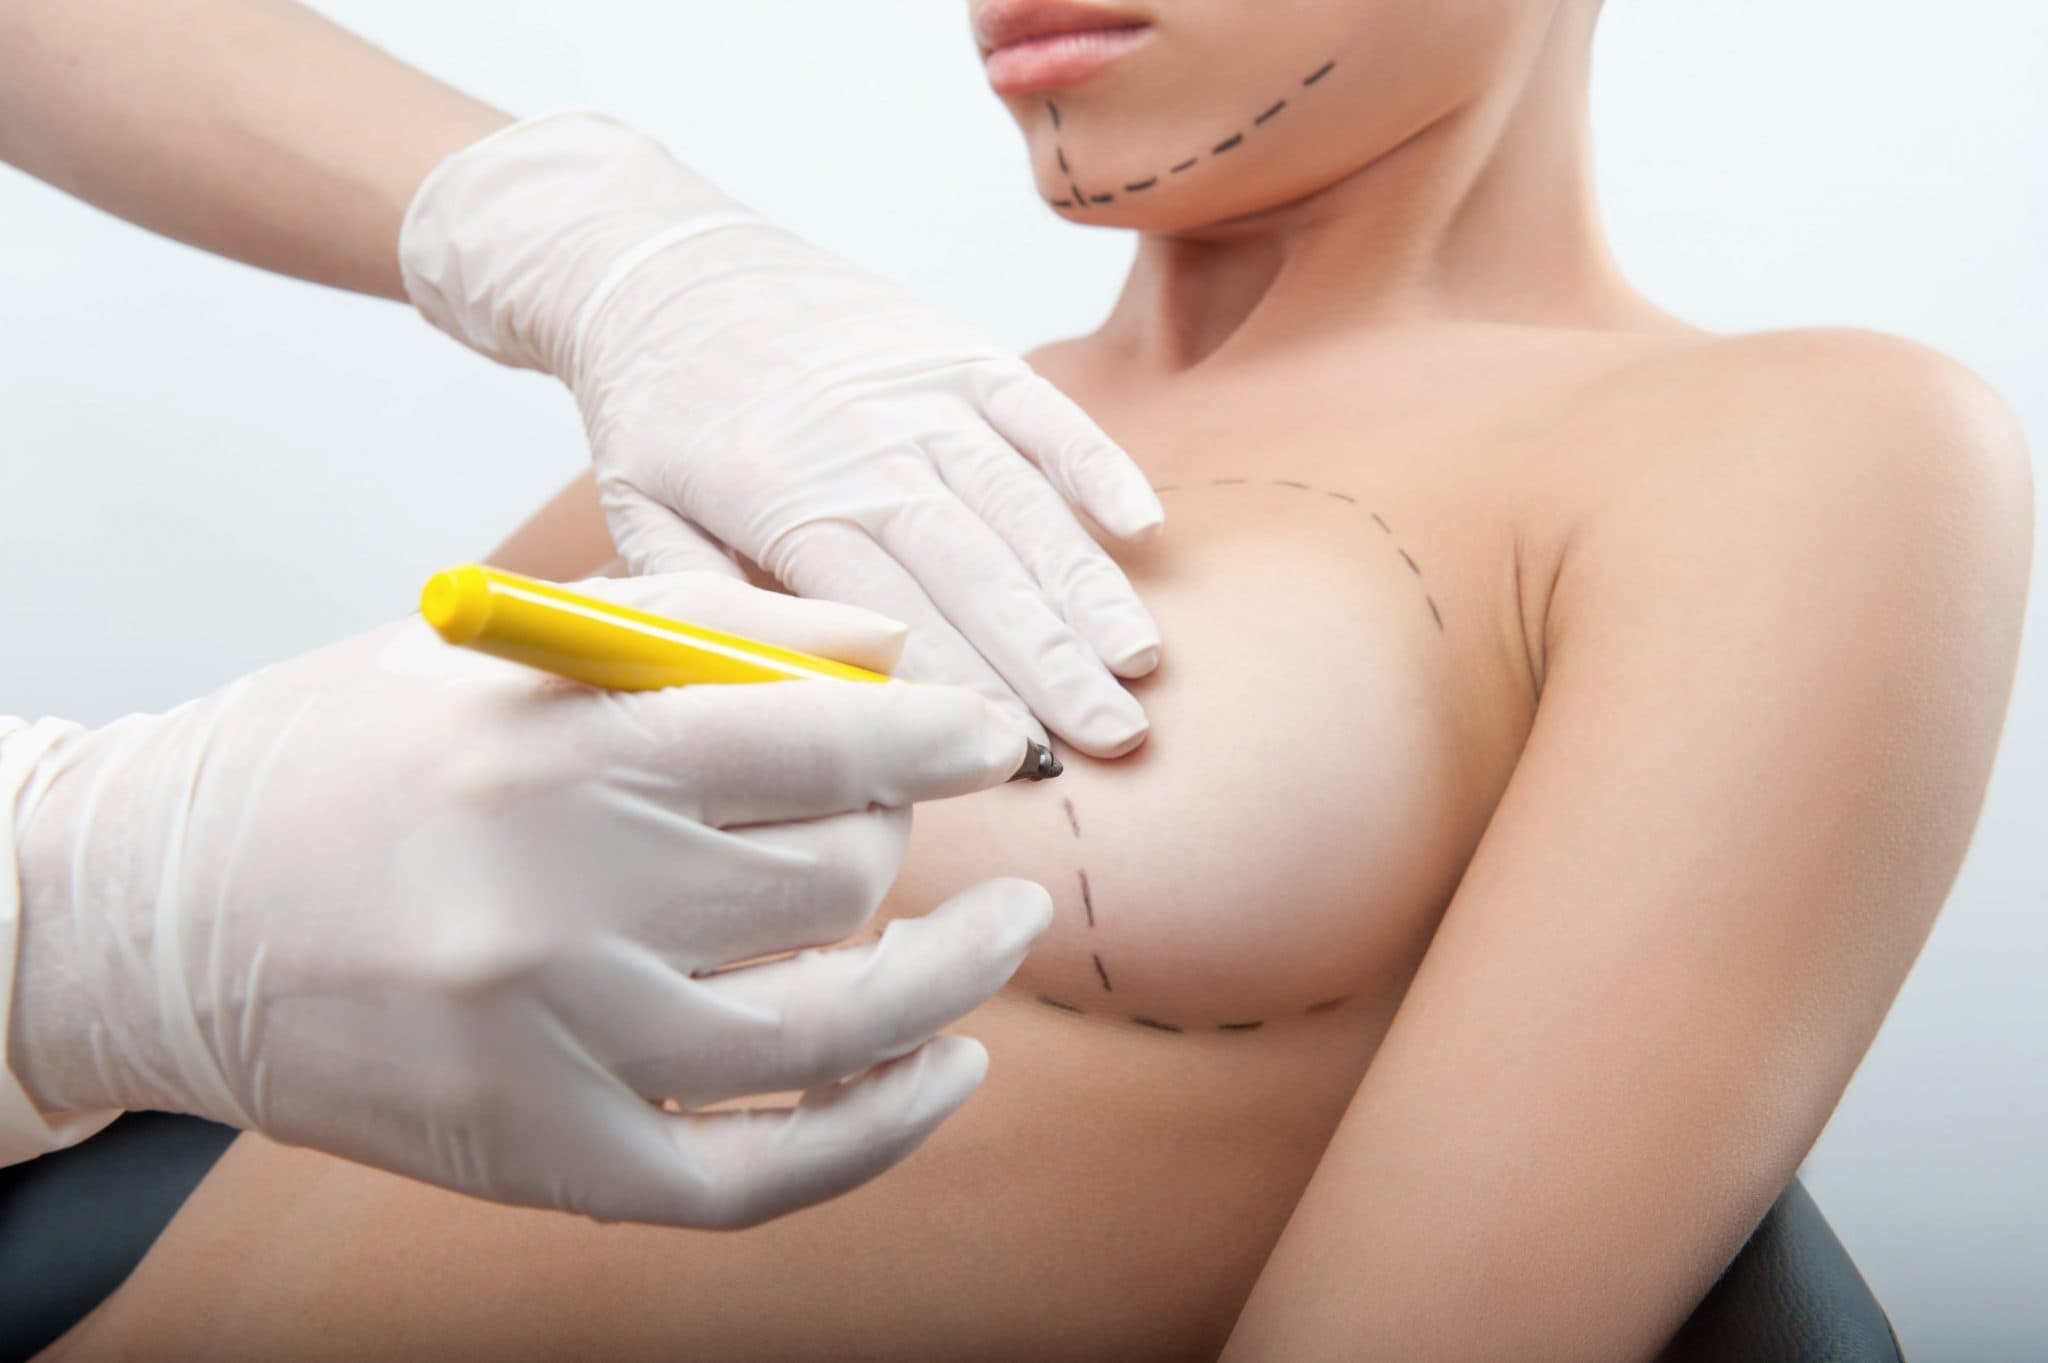 Feel Pretty With Breast Implants